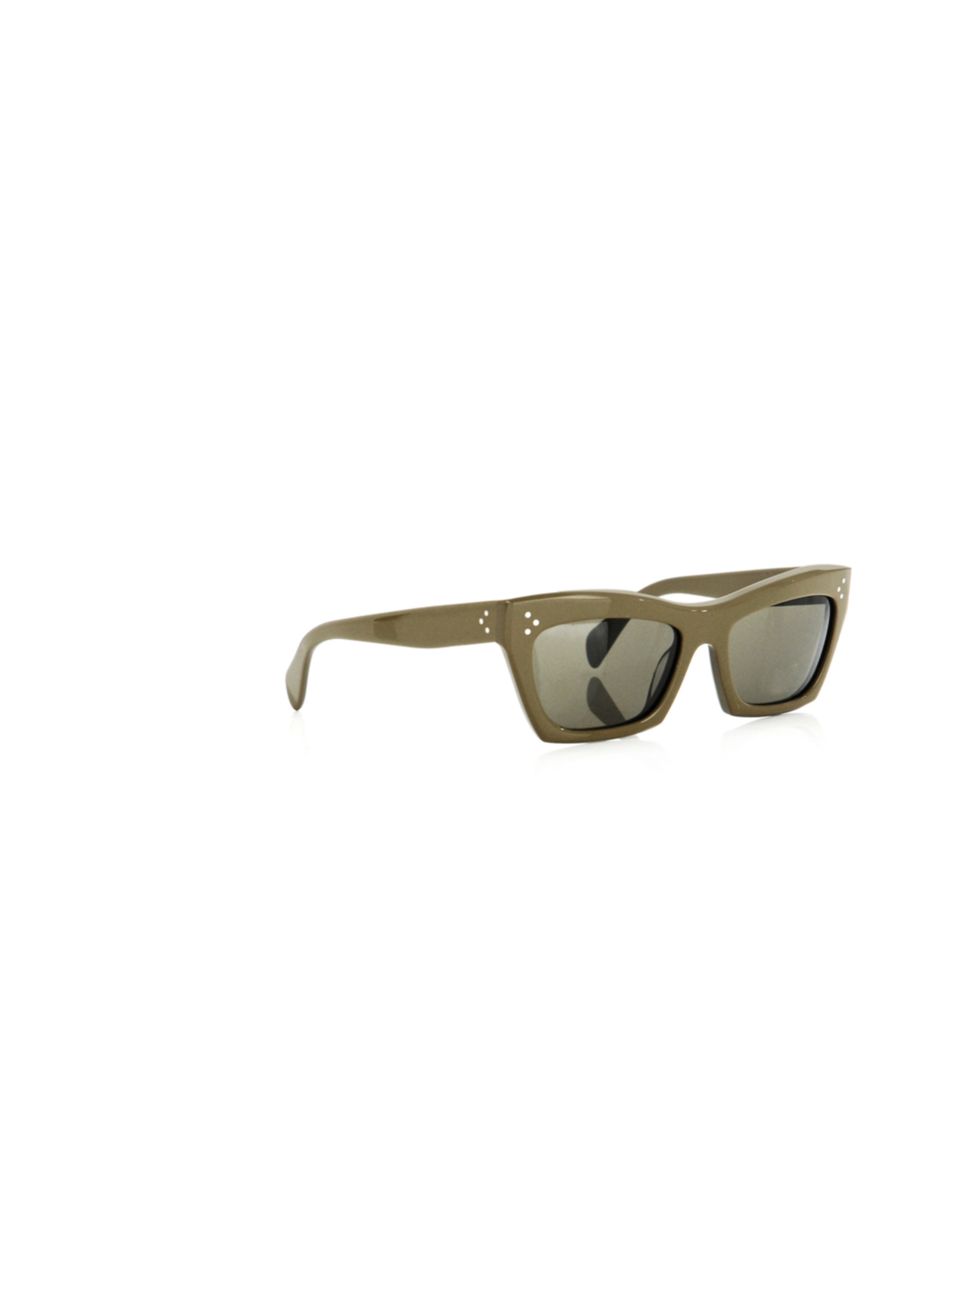 <p>Celine. Sunglasses. Need we say more? Statement geometric frames in a retro-inspired olive shade. We die Celine green geometic sunglasses, £200, at Matches</p><p><a href="http://shopping.elleuk.com/browse?fts=celine+retro+sunglasses">BUY NOW</a></p>